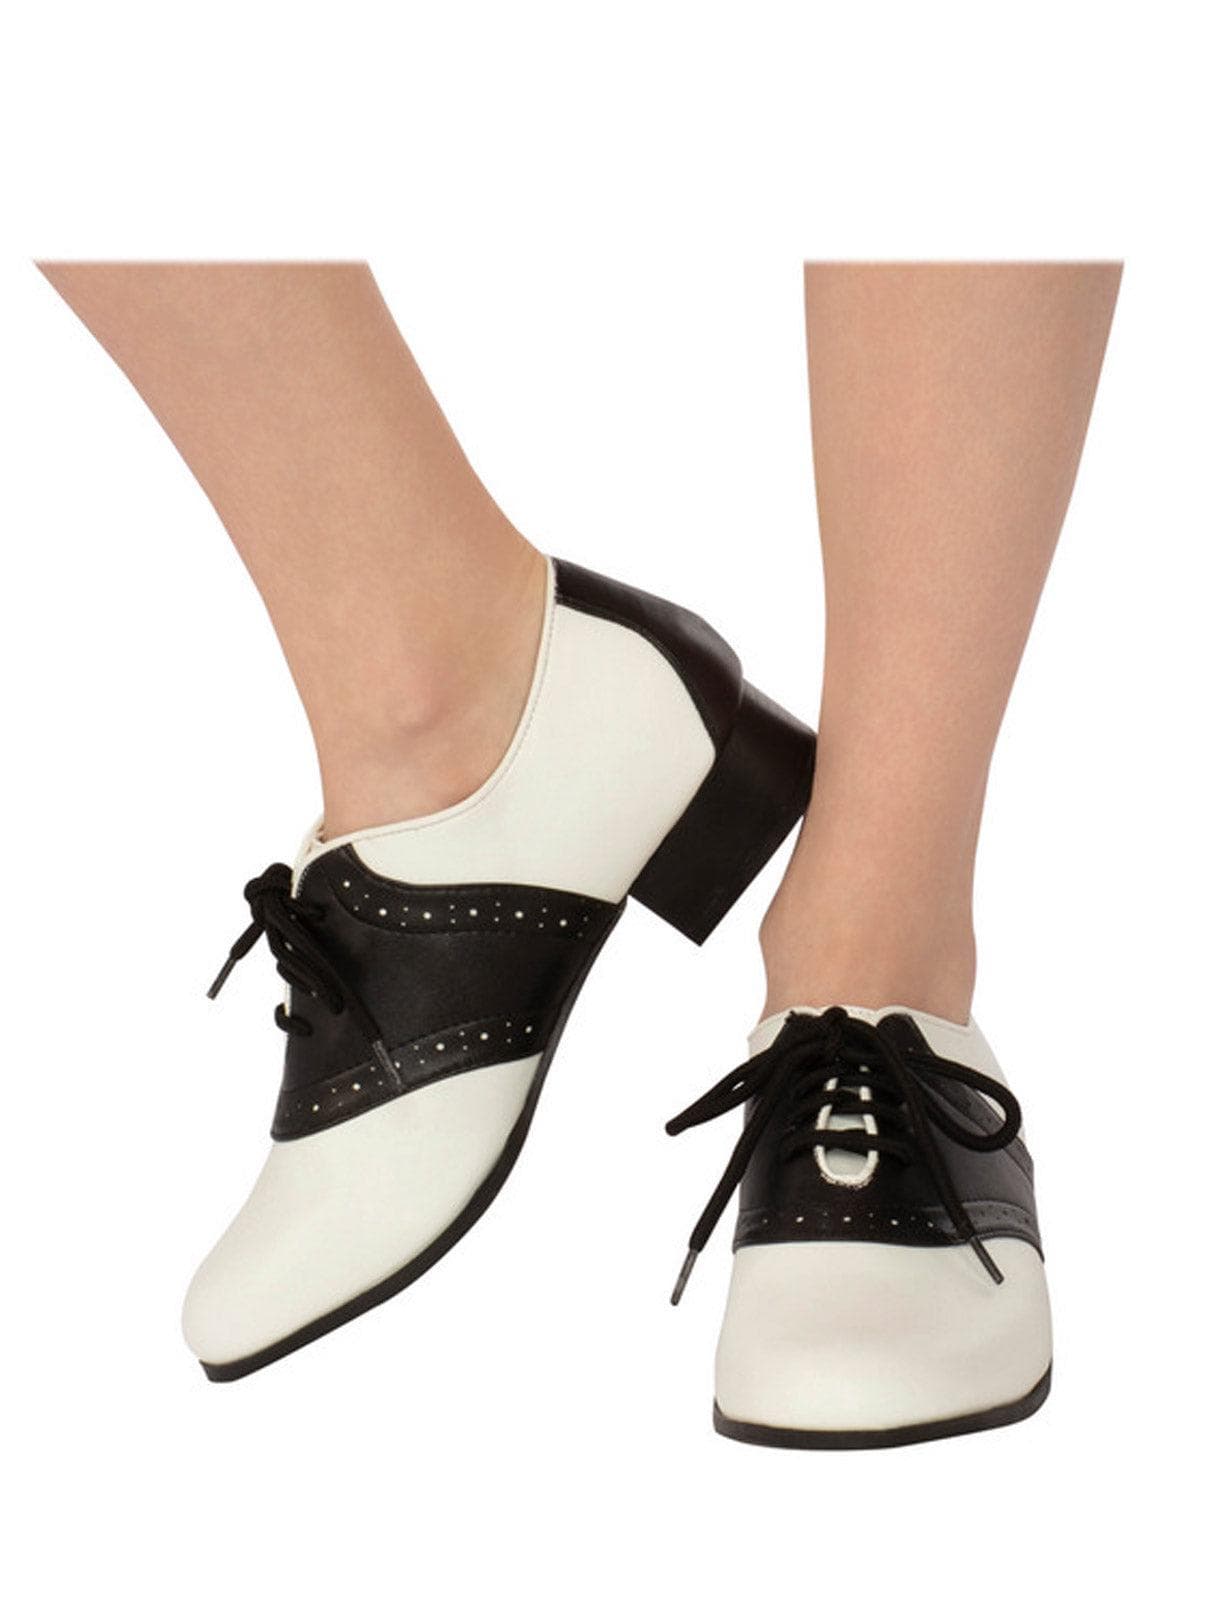 Adult Black and White  1950's Saddle Shoes - costumes.com